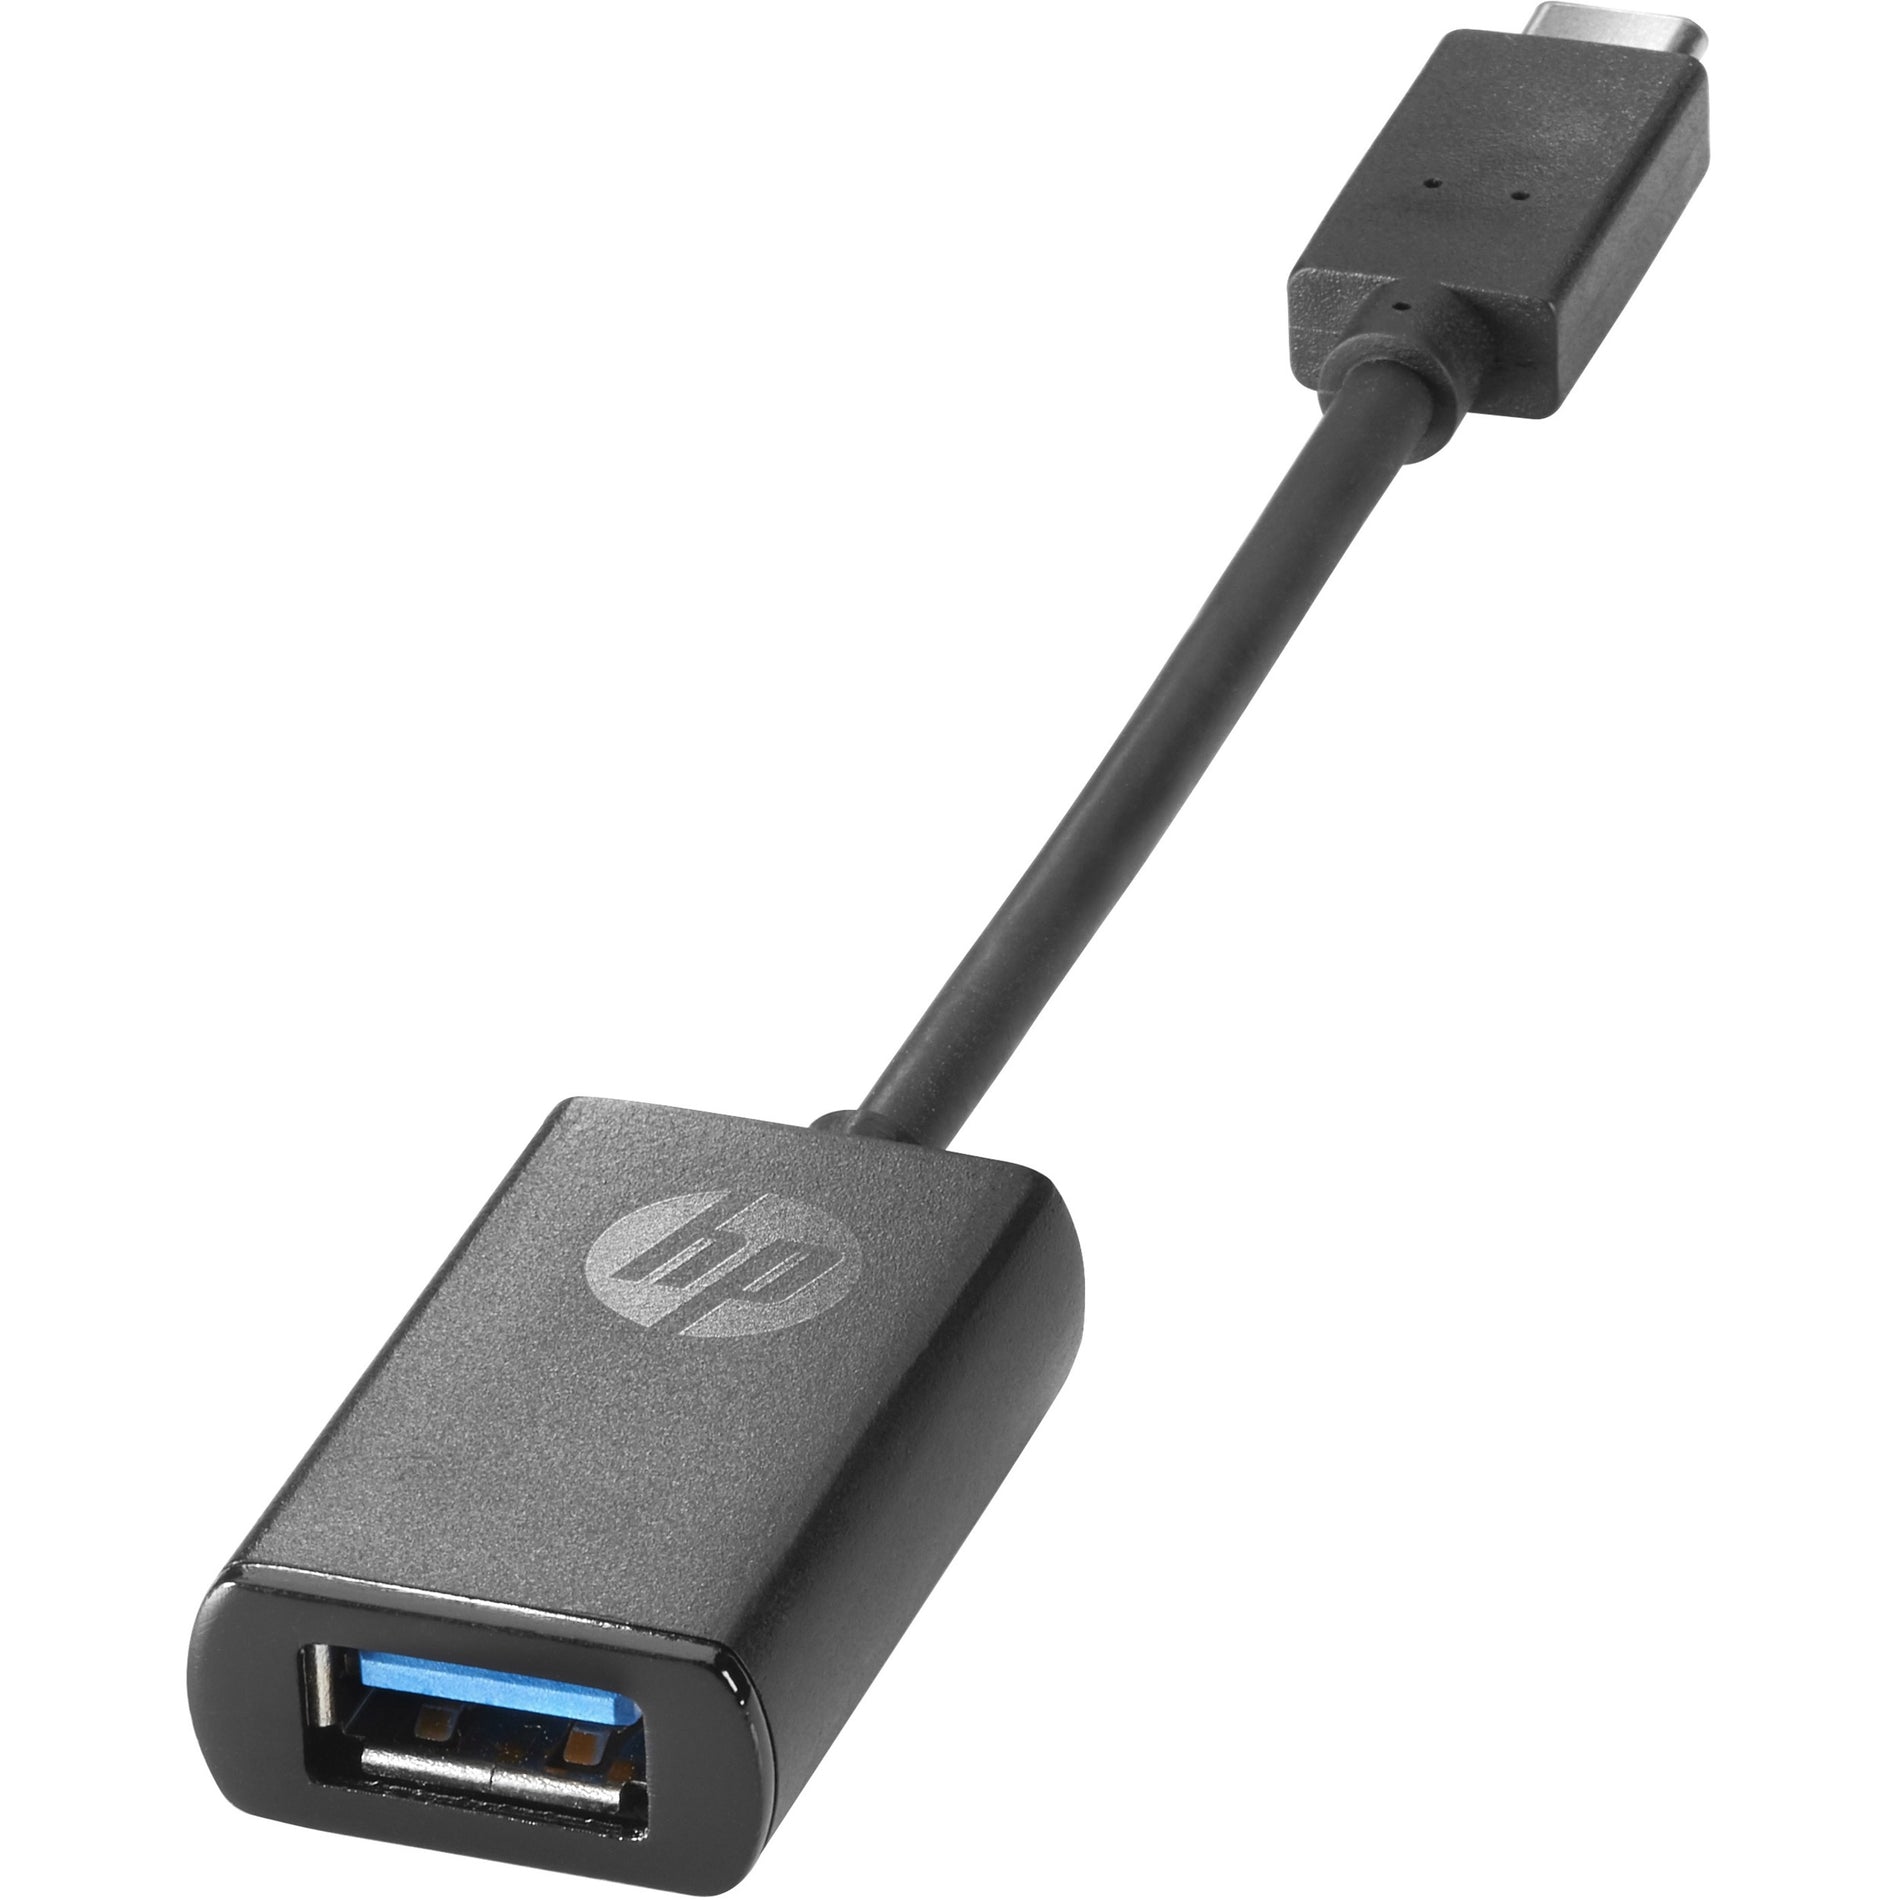 HP N2Z63UT USB-C to USB 3.0 Adapter, Easy Data Transfer and Connectivity